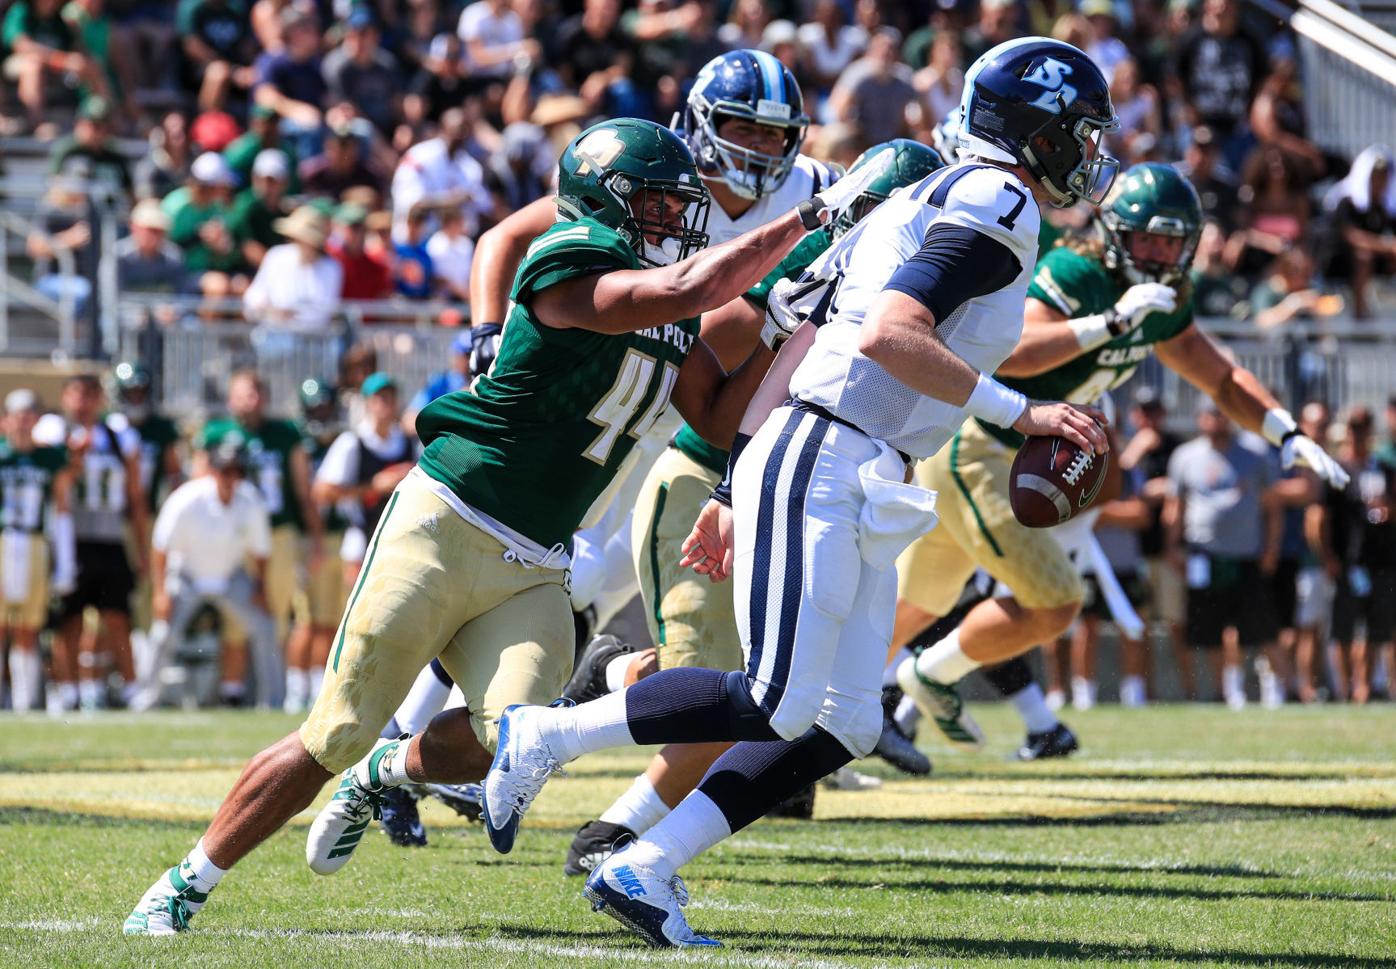 With true freshman at QB, shorthanded Toreros lose season opener at Cal  Poly - The San Diego Union-Tribune